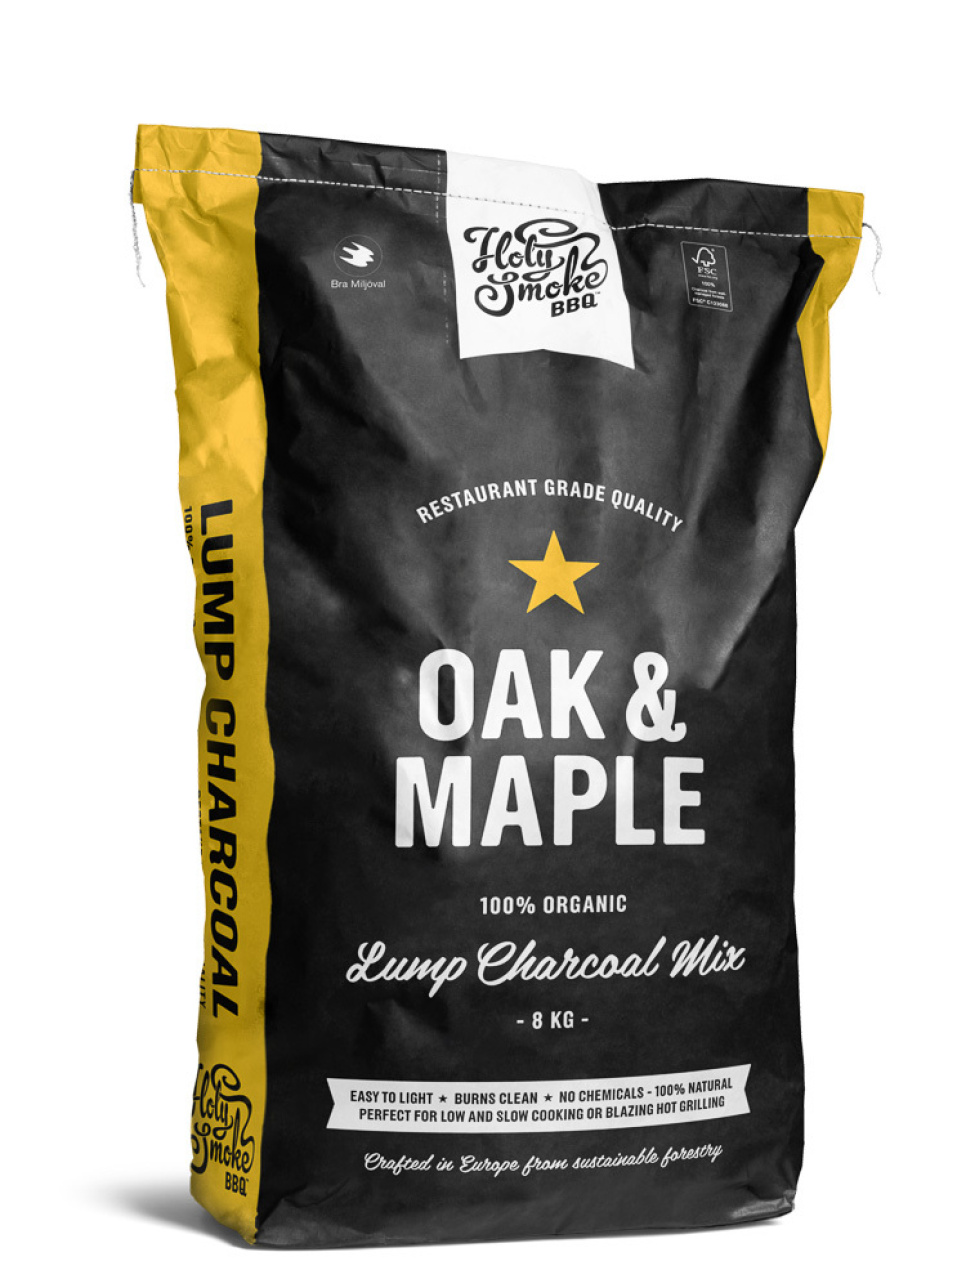 Premium Charcoal, OAK/MAPLE, 8 kg - Holy Smoke BBQ in the group Barbecues, Stoves & Ovens / Barbecue charcoal & briquettes / charcoal at KitchenLab (1282-28917)